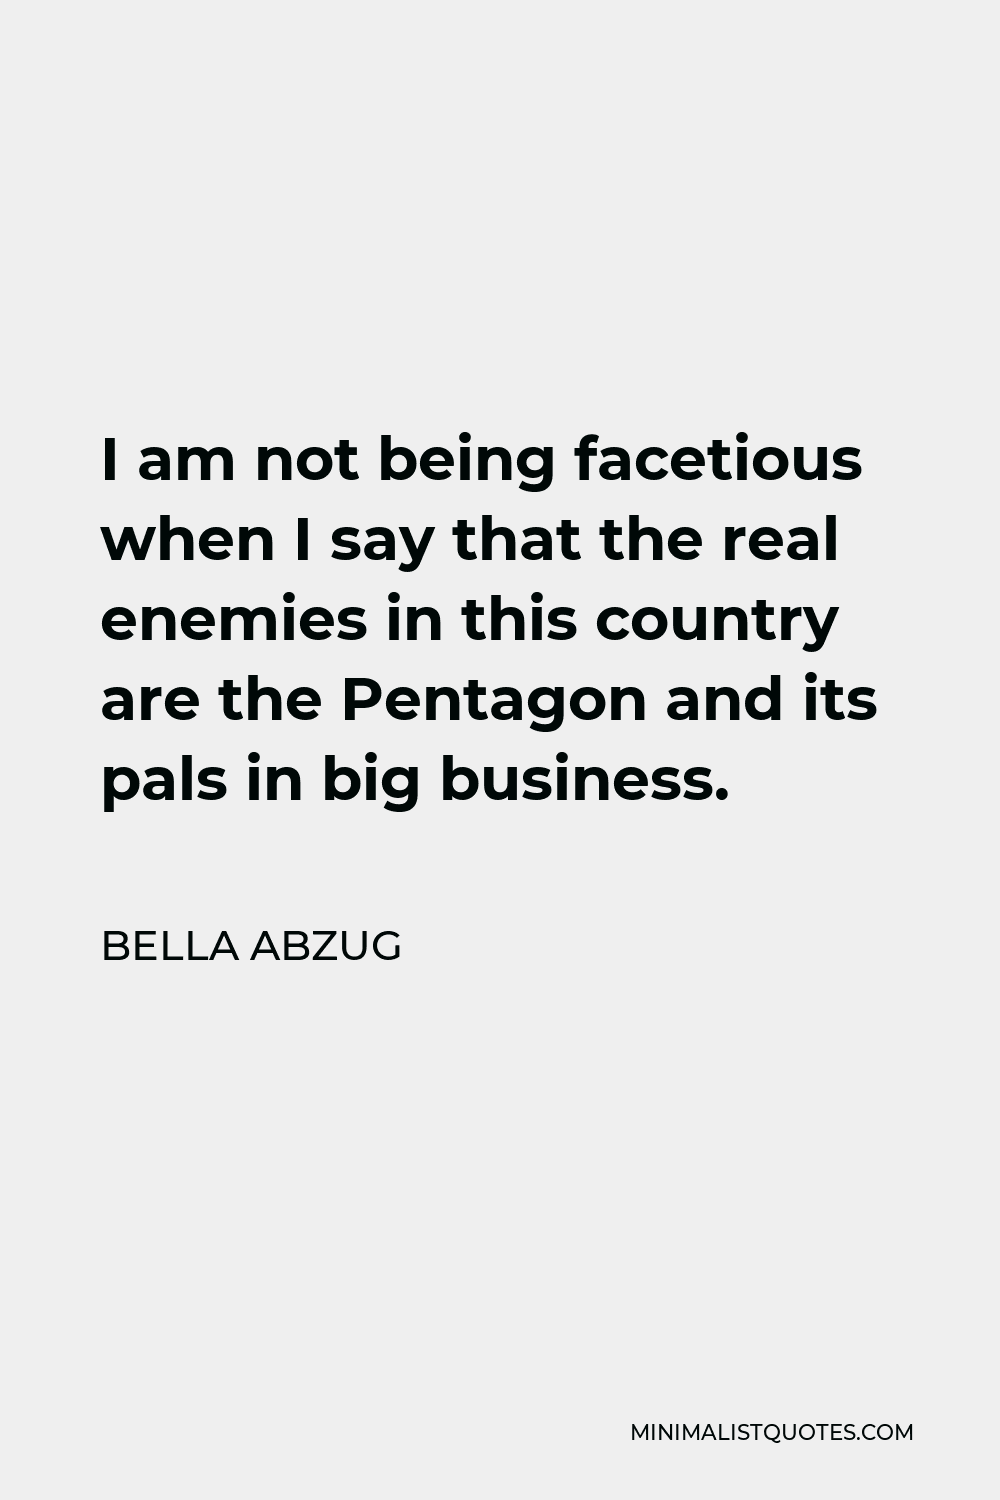 Bella Abzug Quote - I am not being facetious when I say that the real enemies in this country are the Pentagon and its pals in big business.